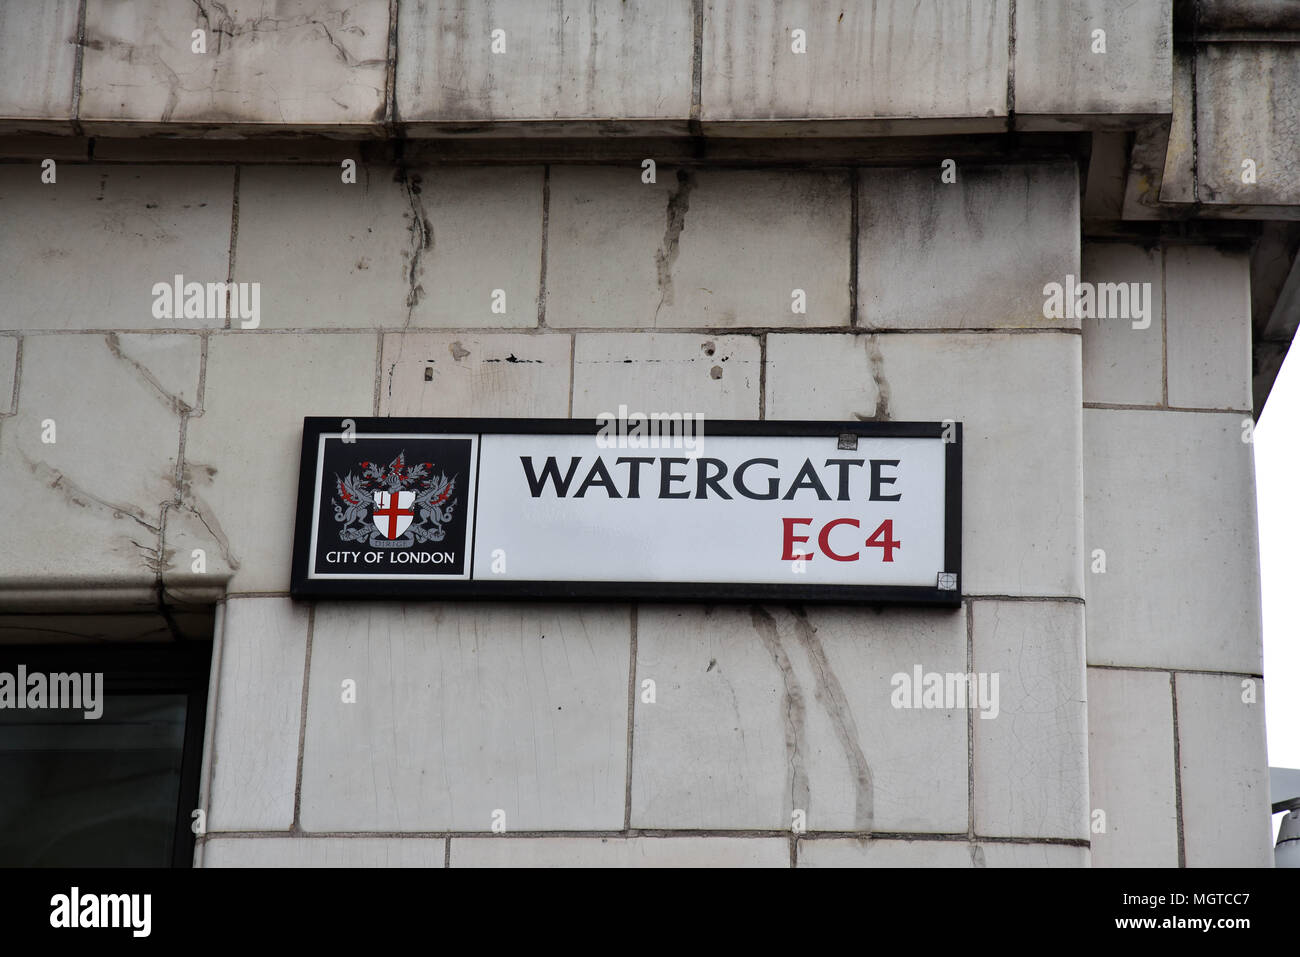 street sign of watergate, london Stock Photo